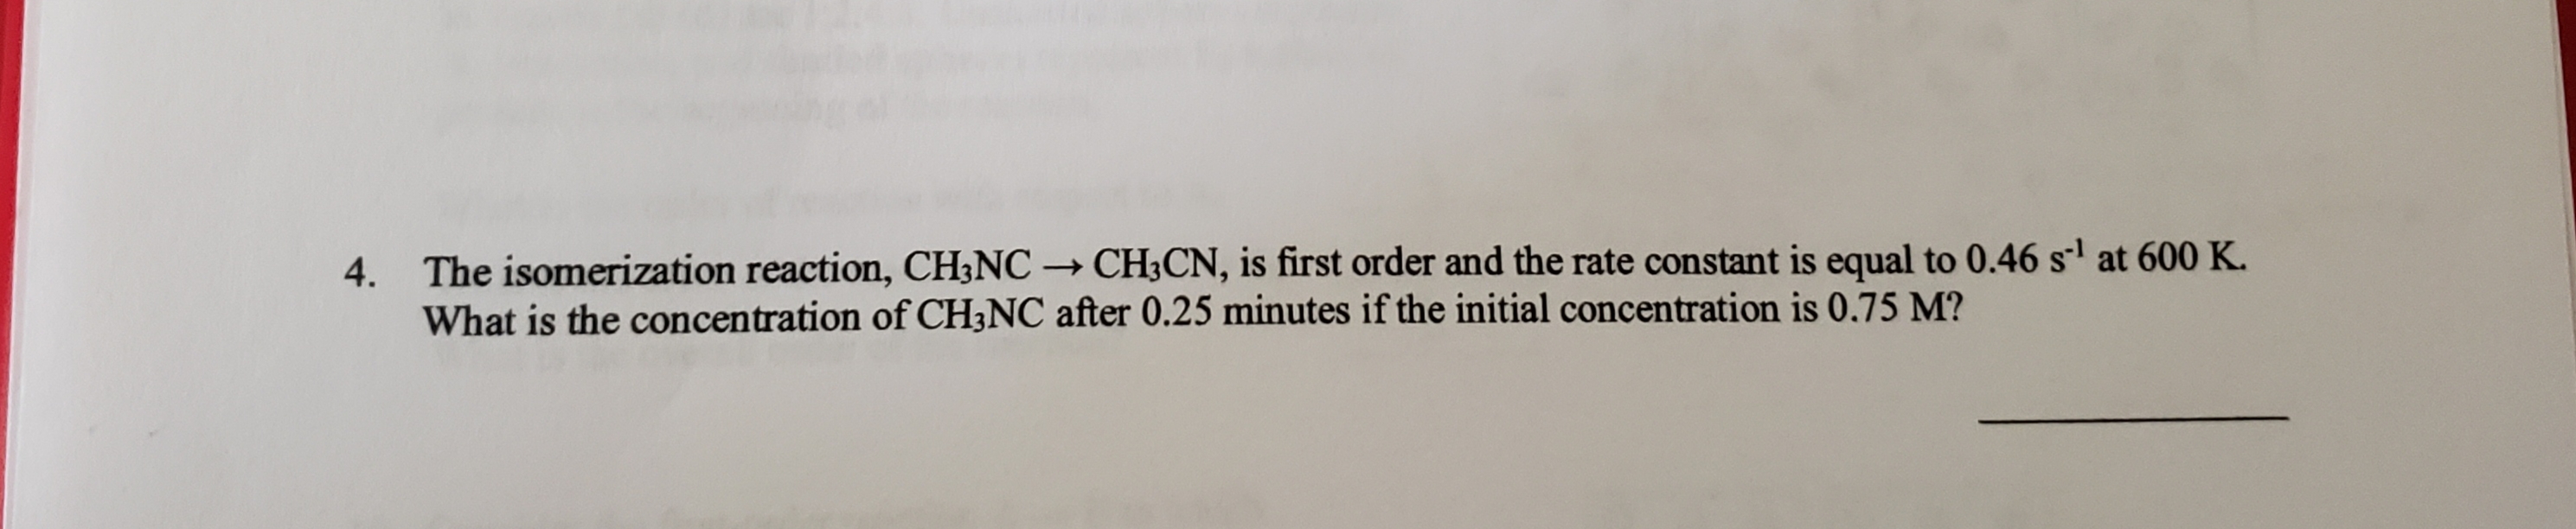 4. The isomerization reaction, CH3NC → CH3CN, is first order and the rate constant is equal to 0.46 s' at 600 K.
What is the concentration of CH3NC after 0.25 minutes if the initial concentration is 0.75 M?
